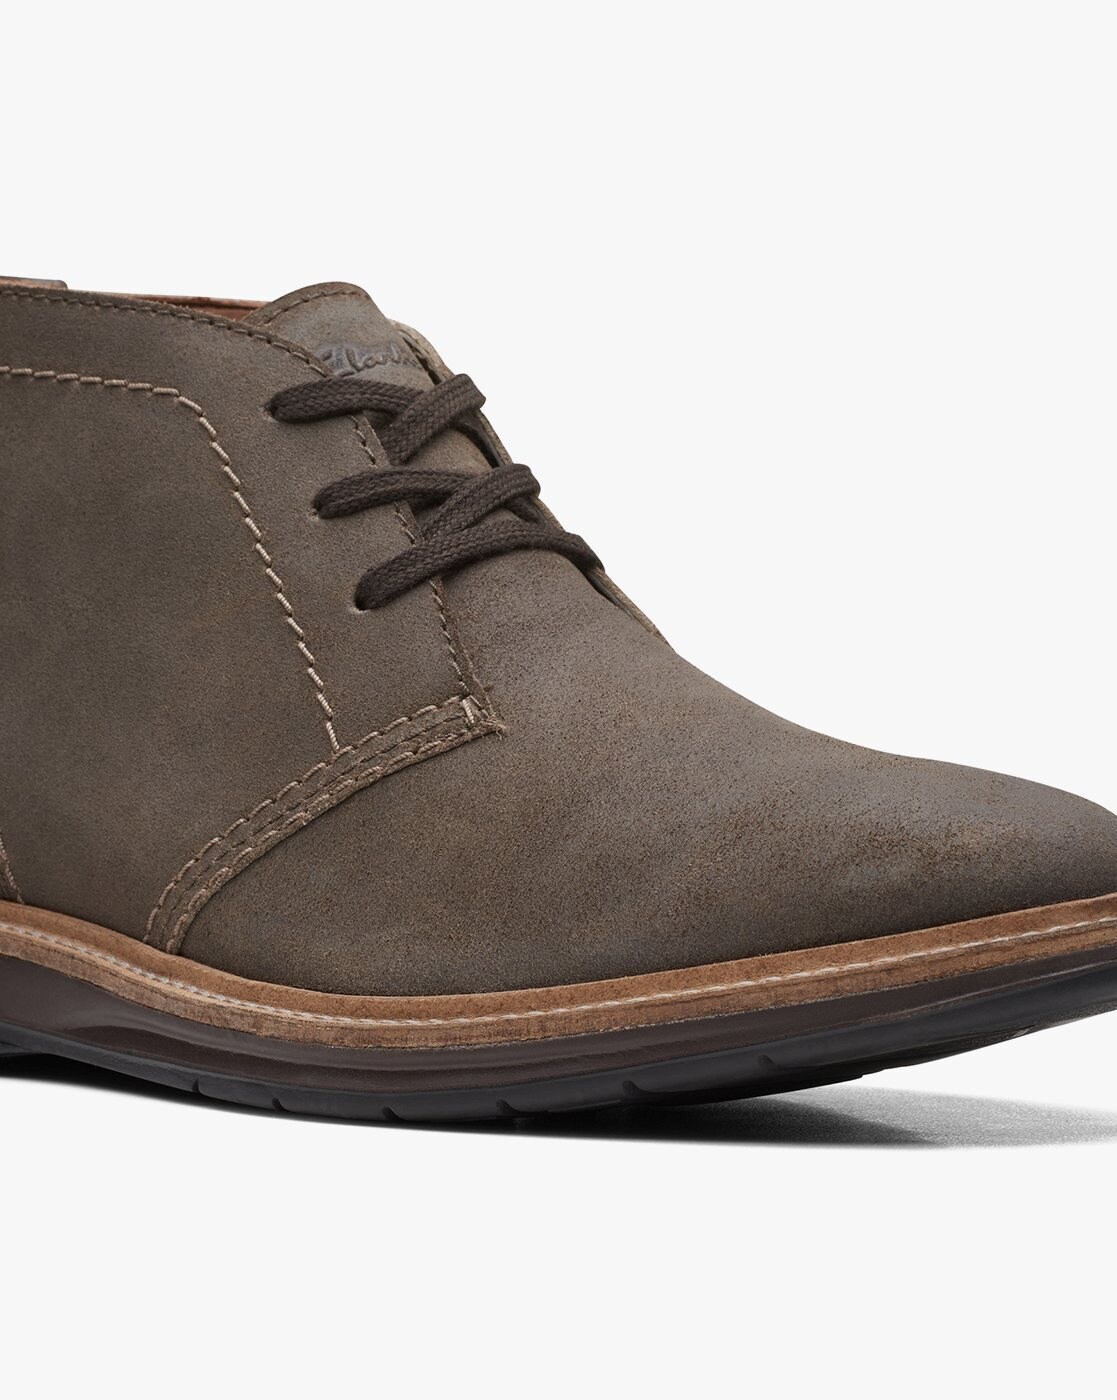 Buy Grey Boots for Men by CLARKS Online